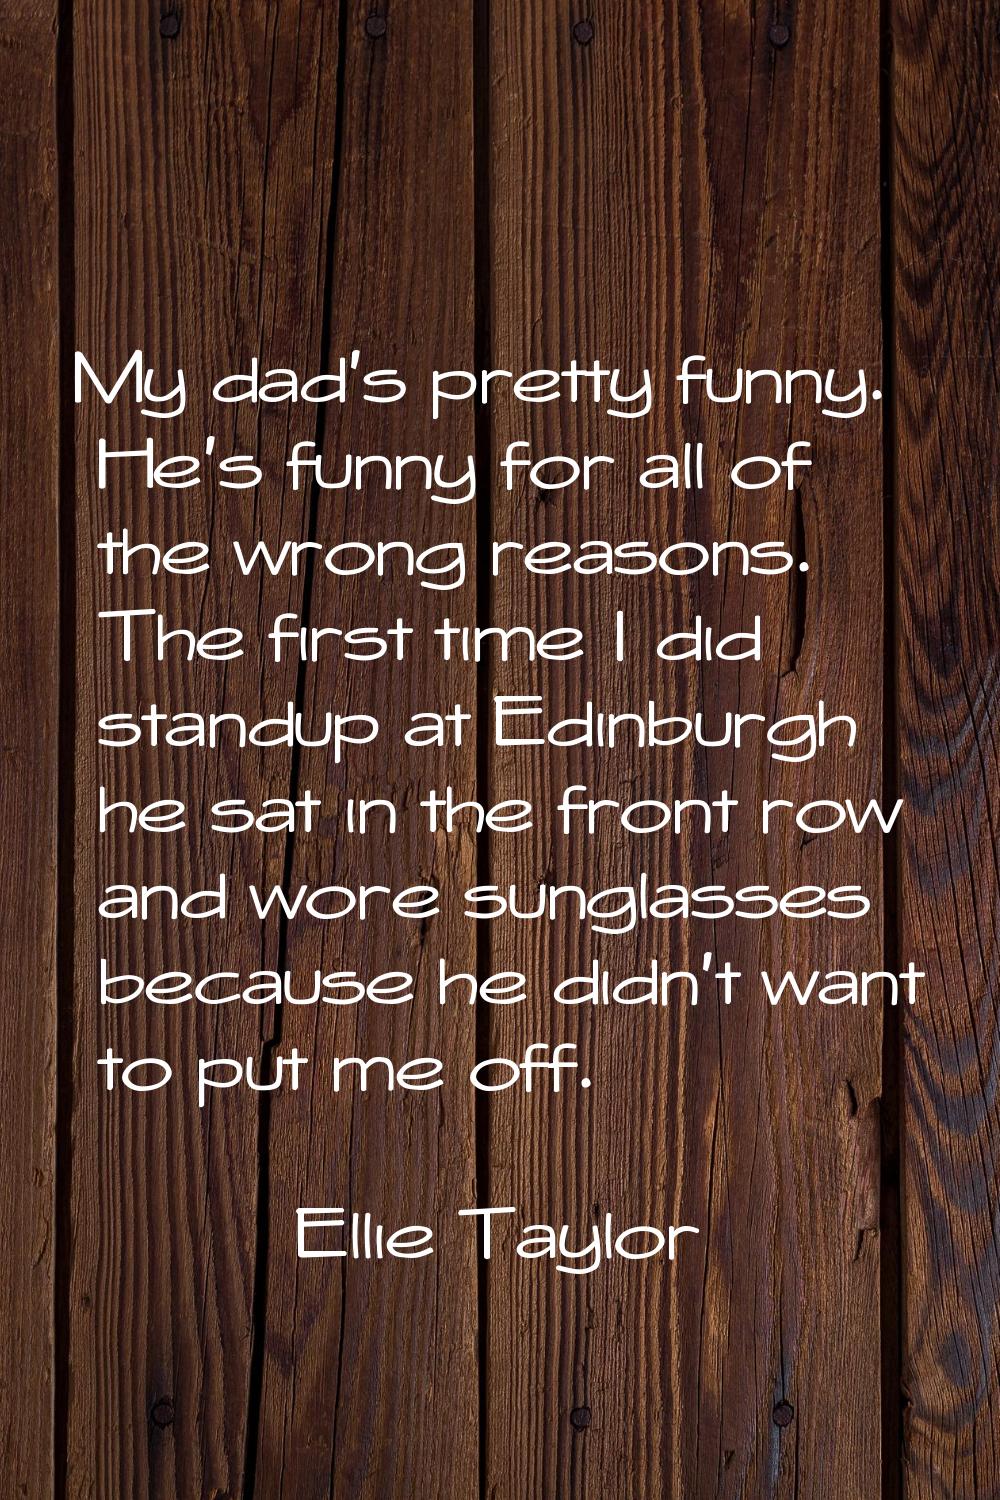 My dad's pretty funny. He's funny for all of the wrong reasons. The first time I did standup at Edi